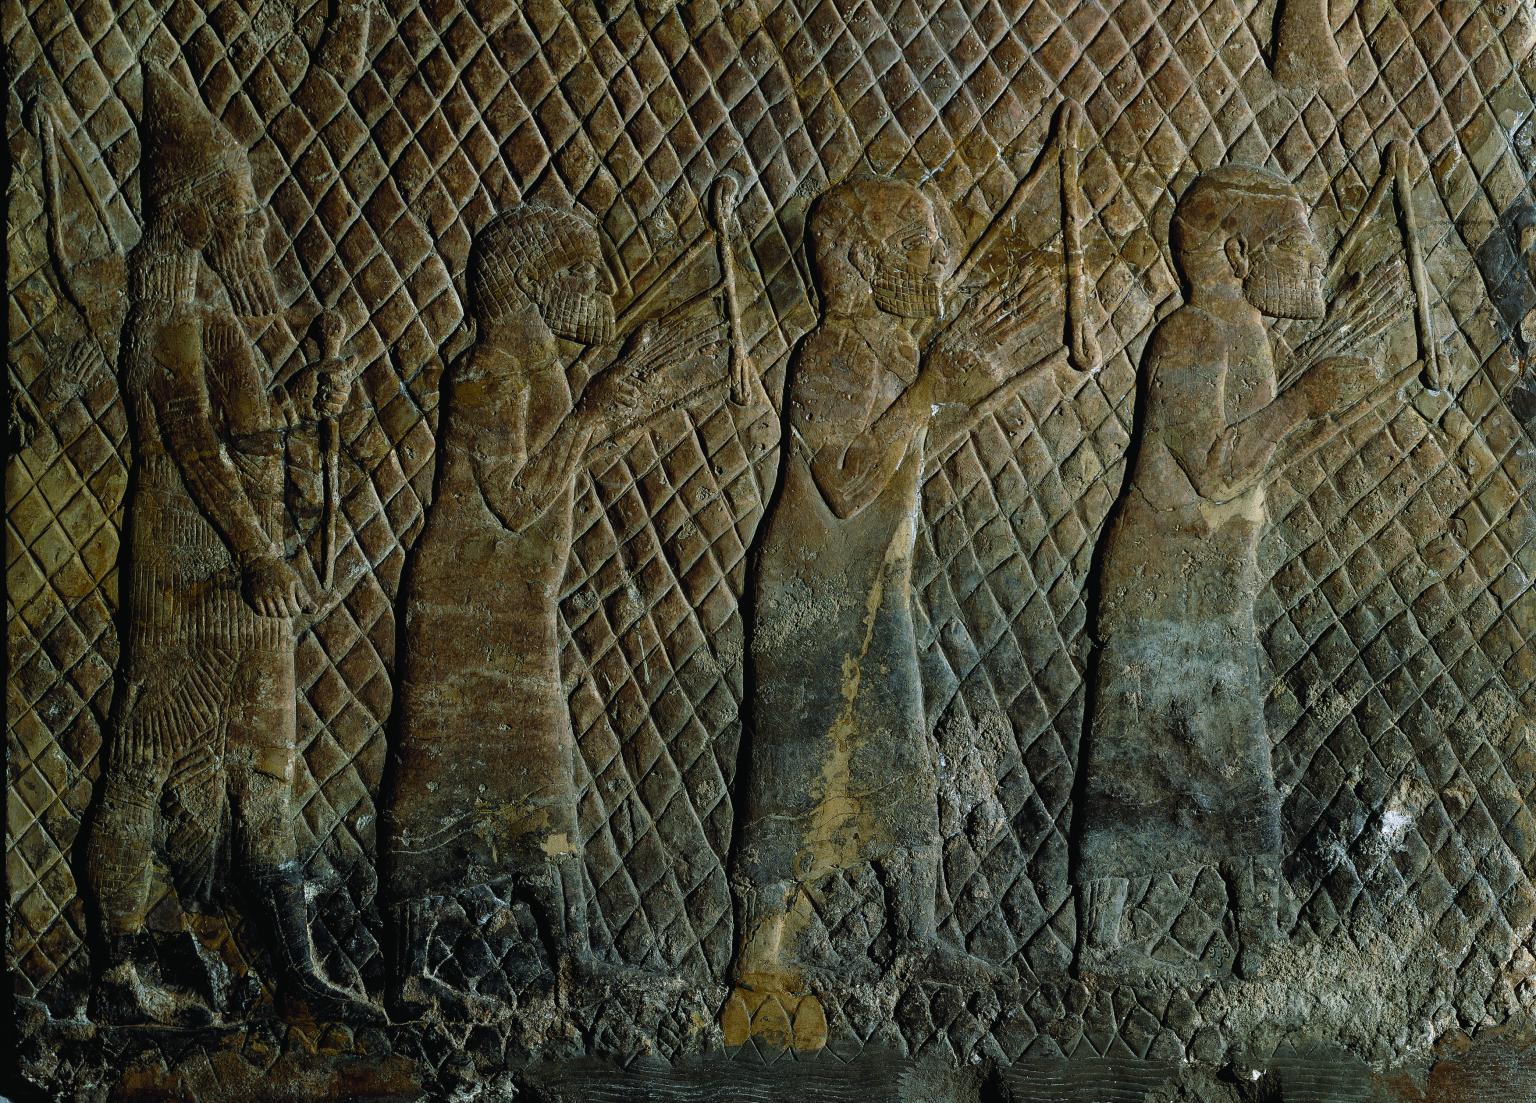 Wall relief showing three bare-headed musicians in tunics holding stringed instruments against their chests, with bearded soldier holding weapon behind them.